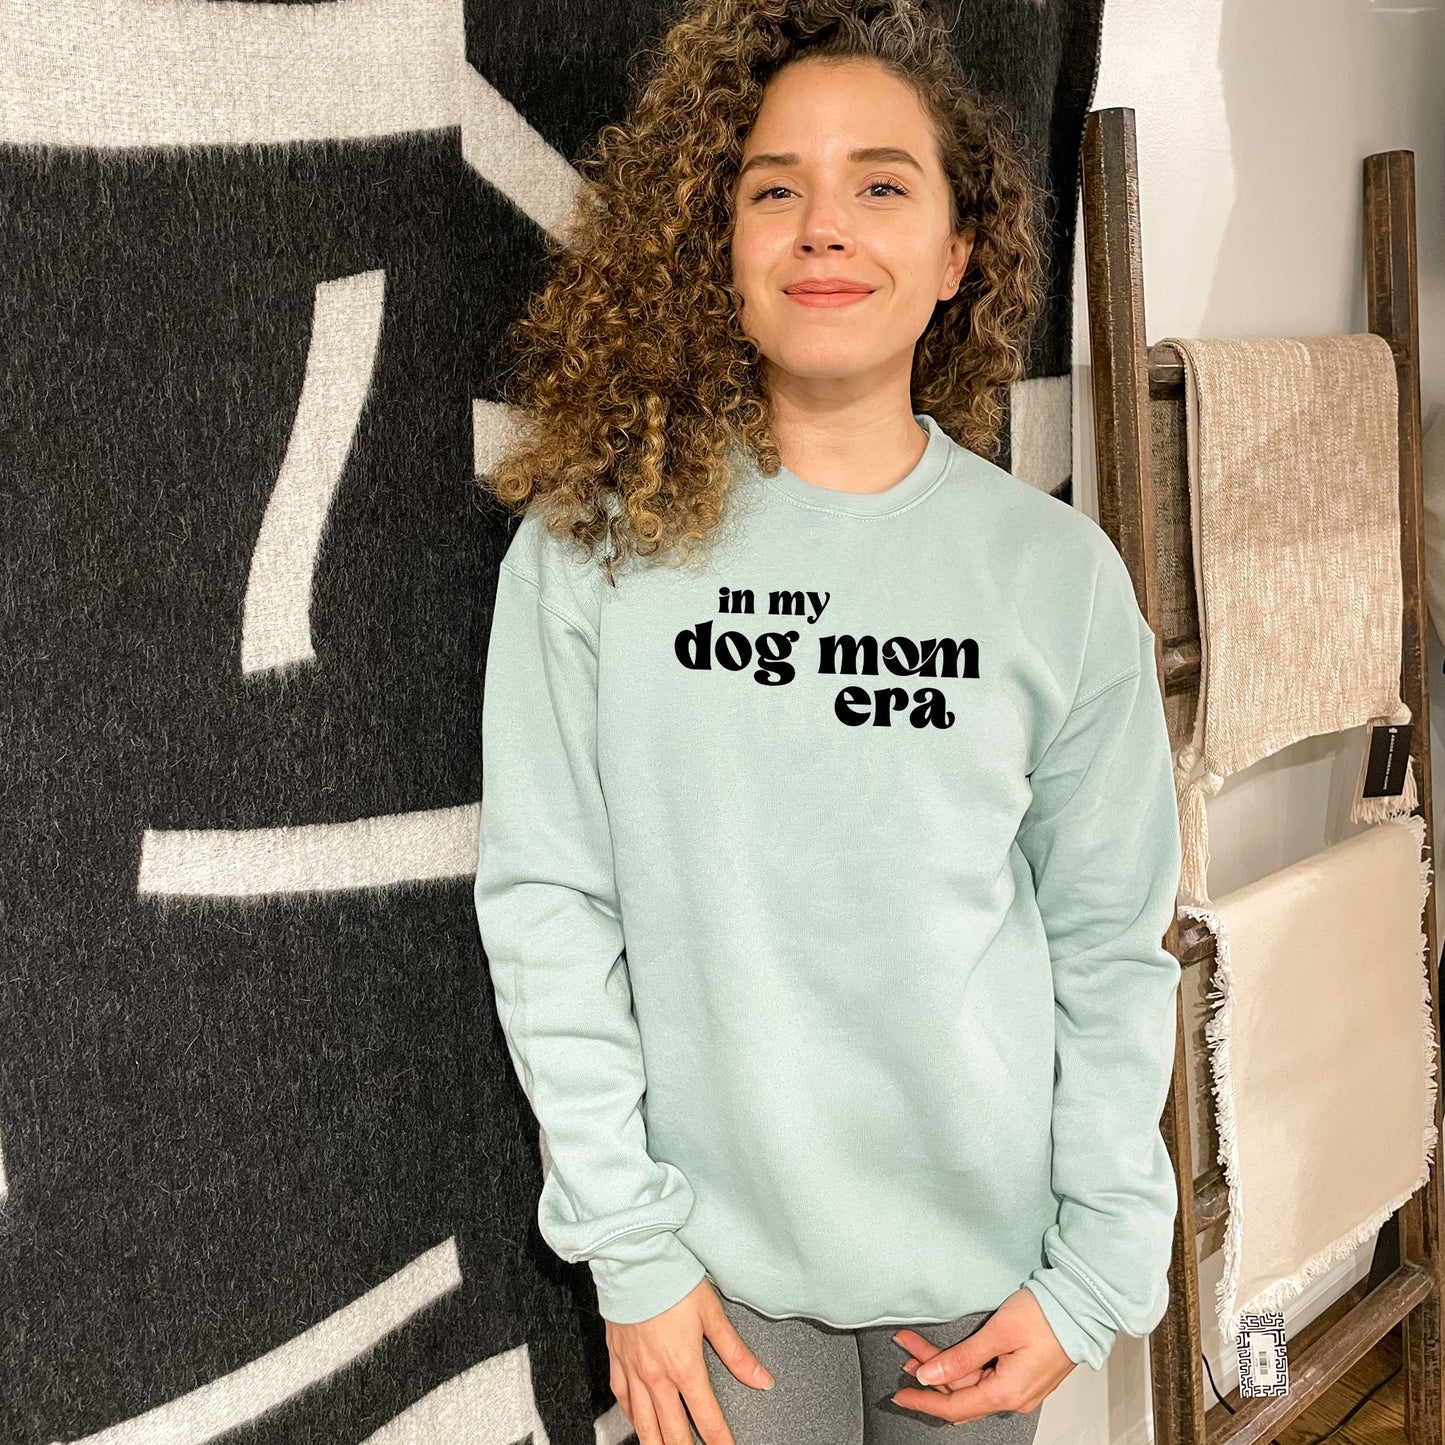 a woman standing in front of a wall with a dog mom on it